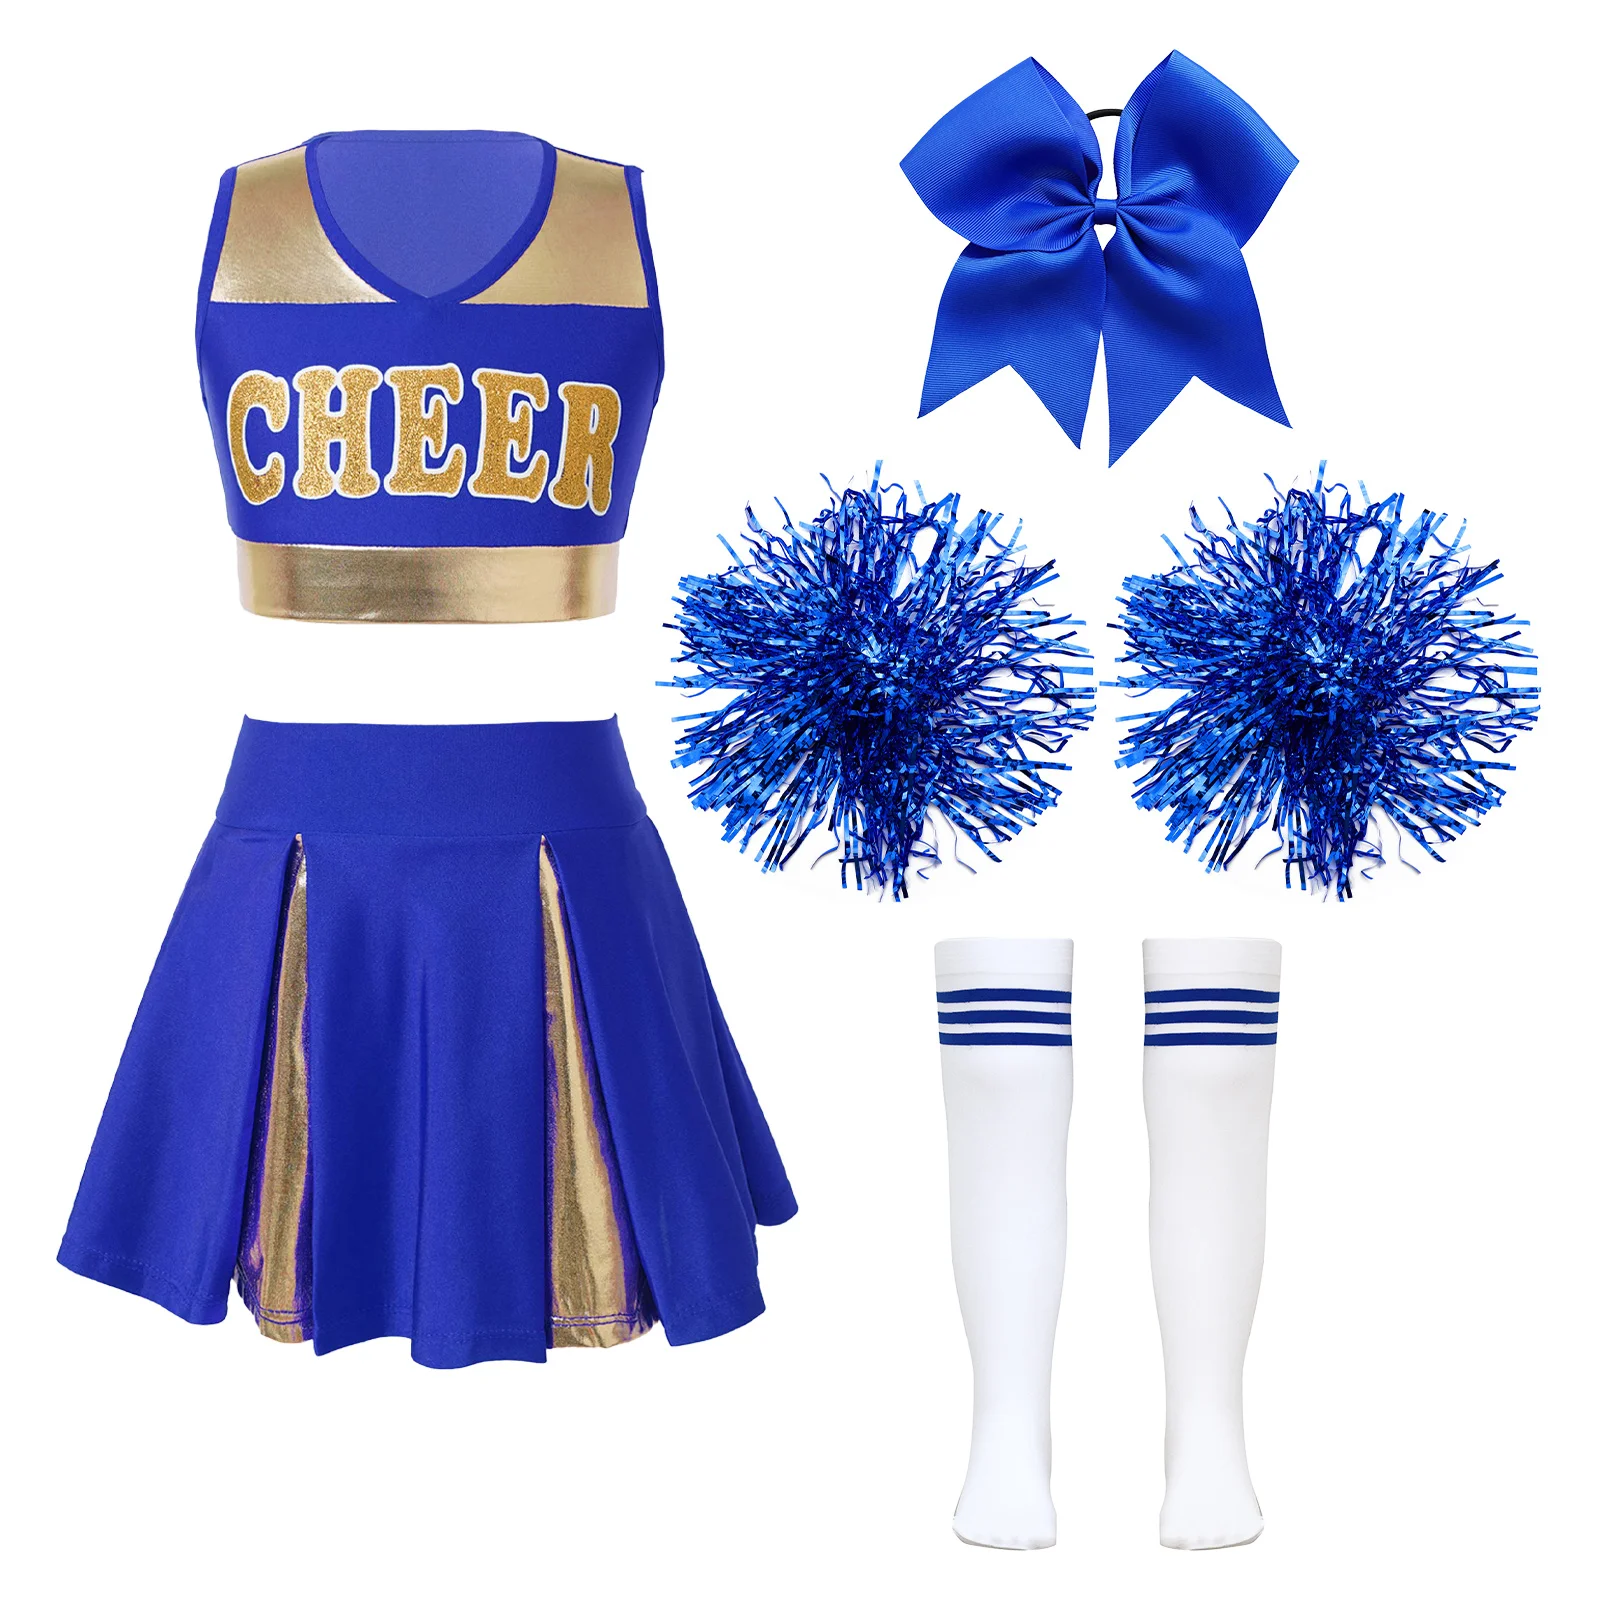 

Cheer Leader Costumes for Girls Cheerleading Outfit Kids Sleeveless Dance Dress Halloween Party Birthday Costume Fancy Dress Up